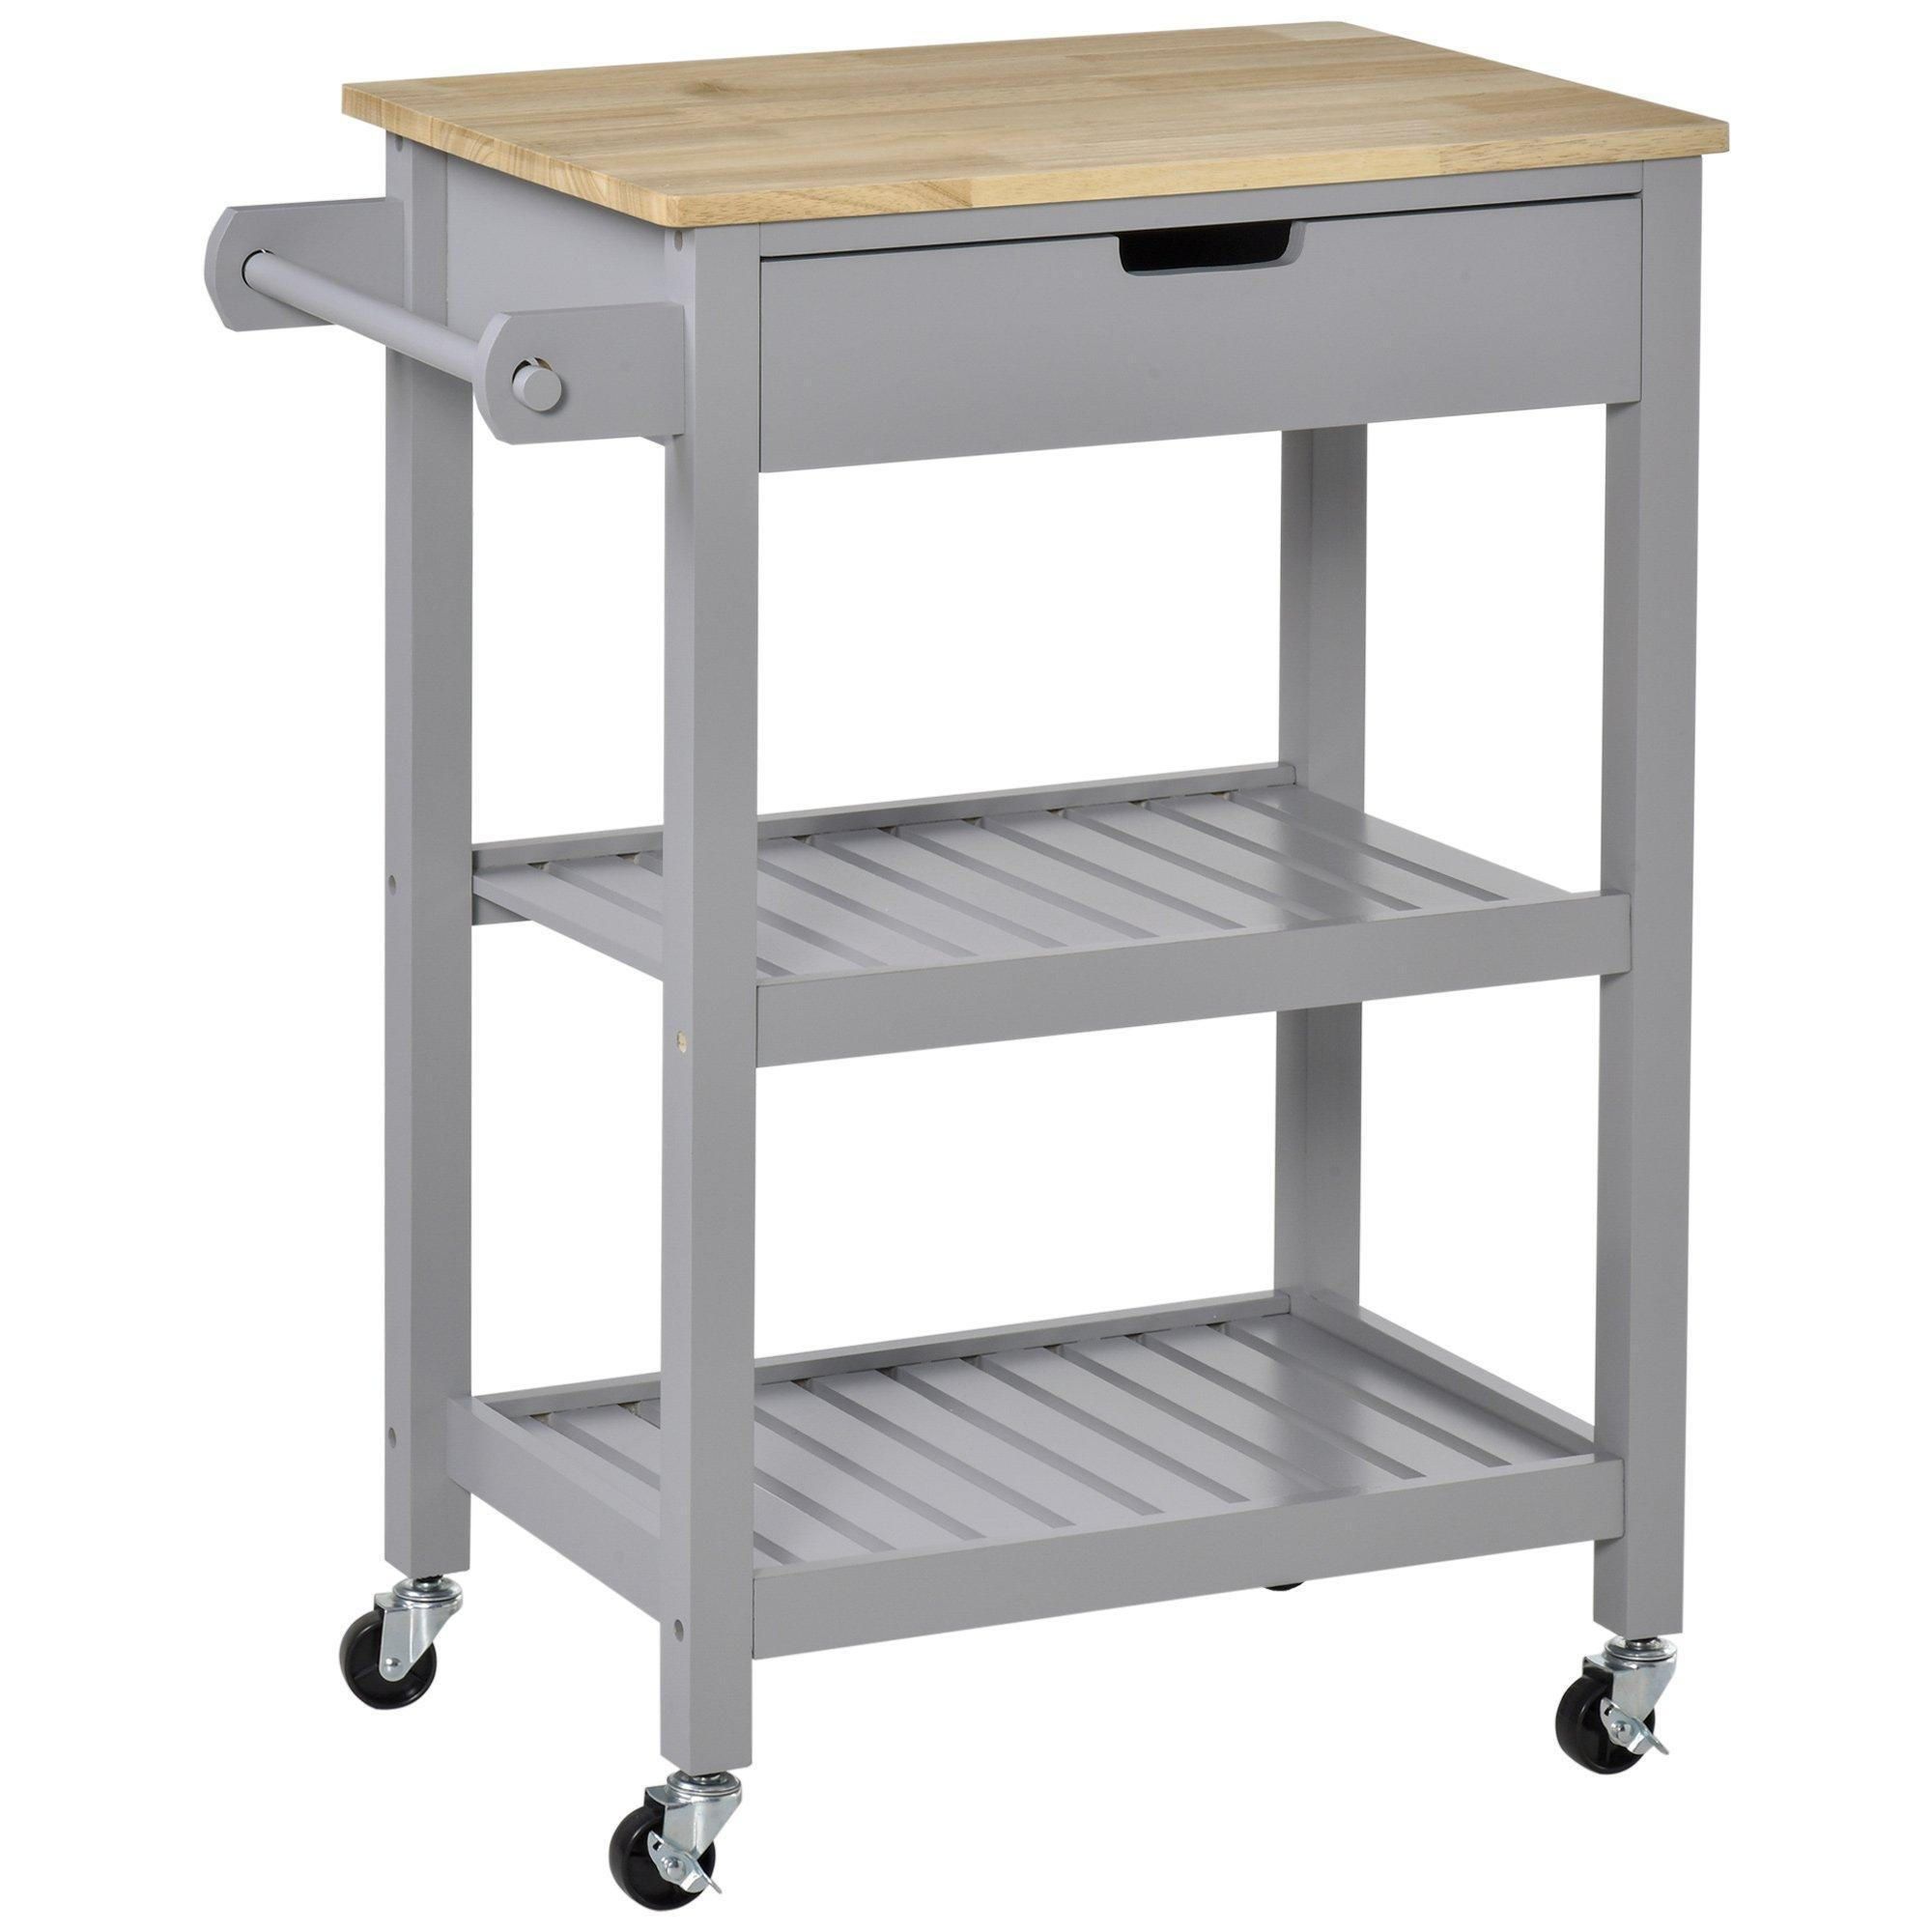 Kitchen Trolley Utility Cart with Rubberwood Worktop Towel Rack Drawer - image 1